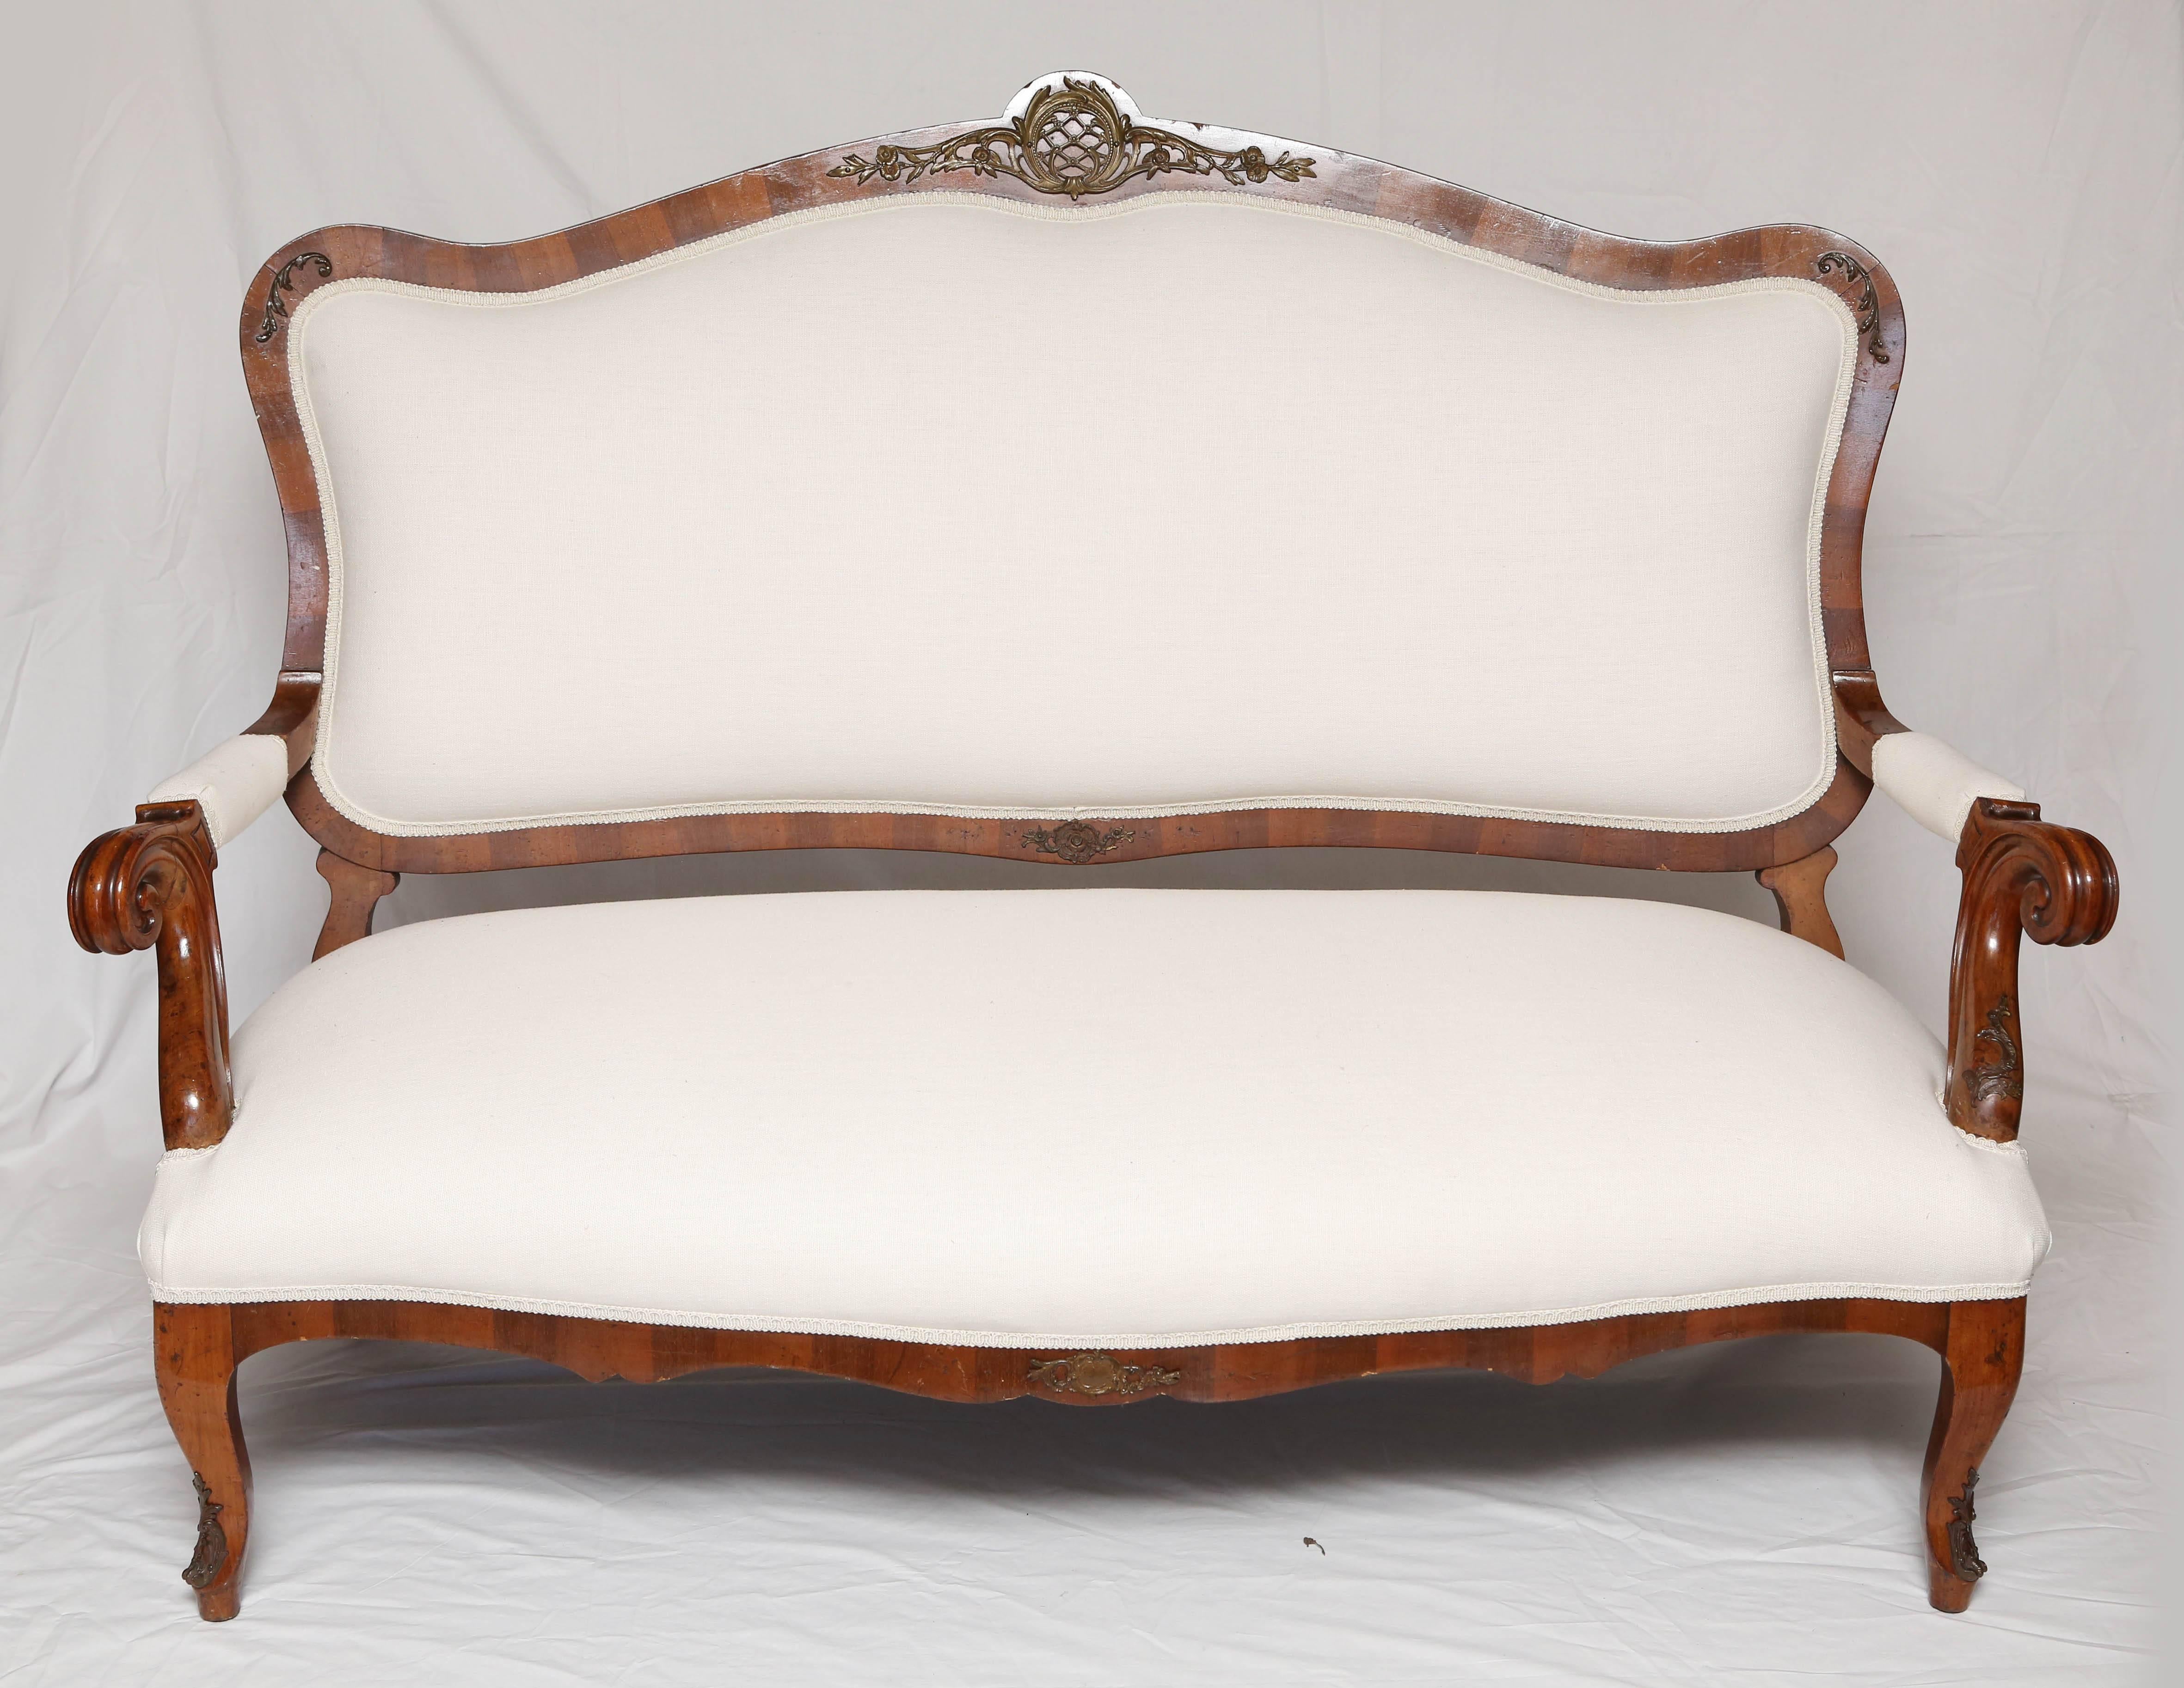 This is a superb walnut French loveseat or settee with white upholstery gilt metal accents, it has some nice brass work to the legs and back, in a white fabric.
The condition is good, made in France, circa 1860.
The fabric has been recovered this